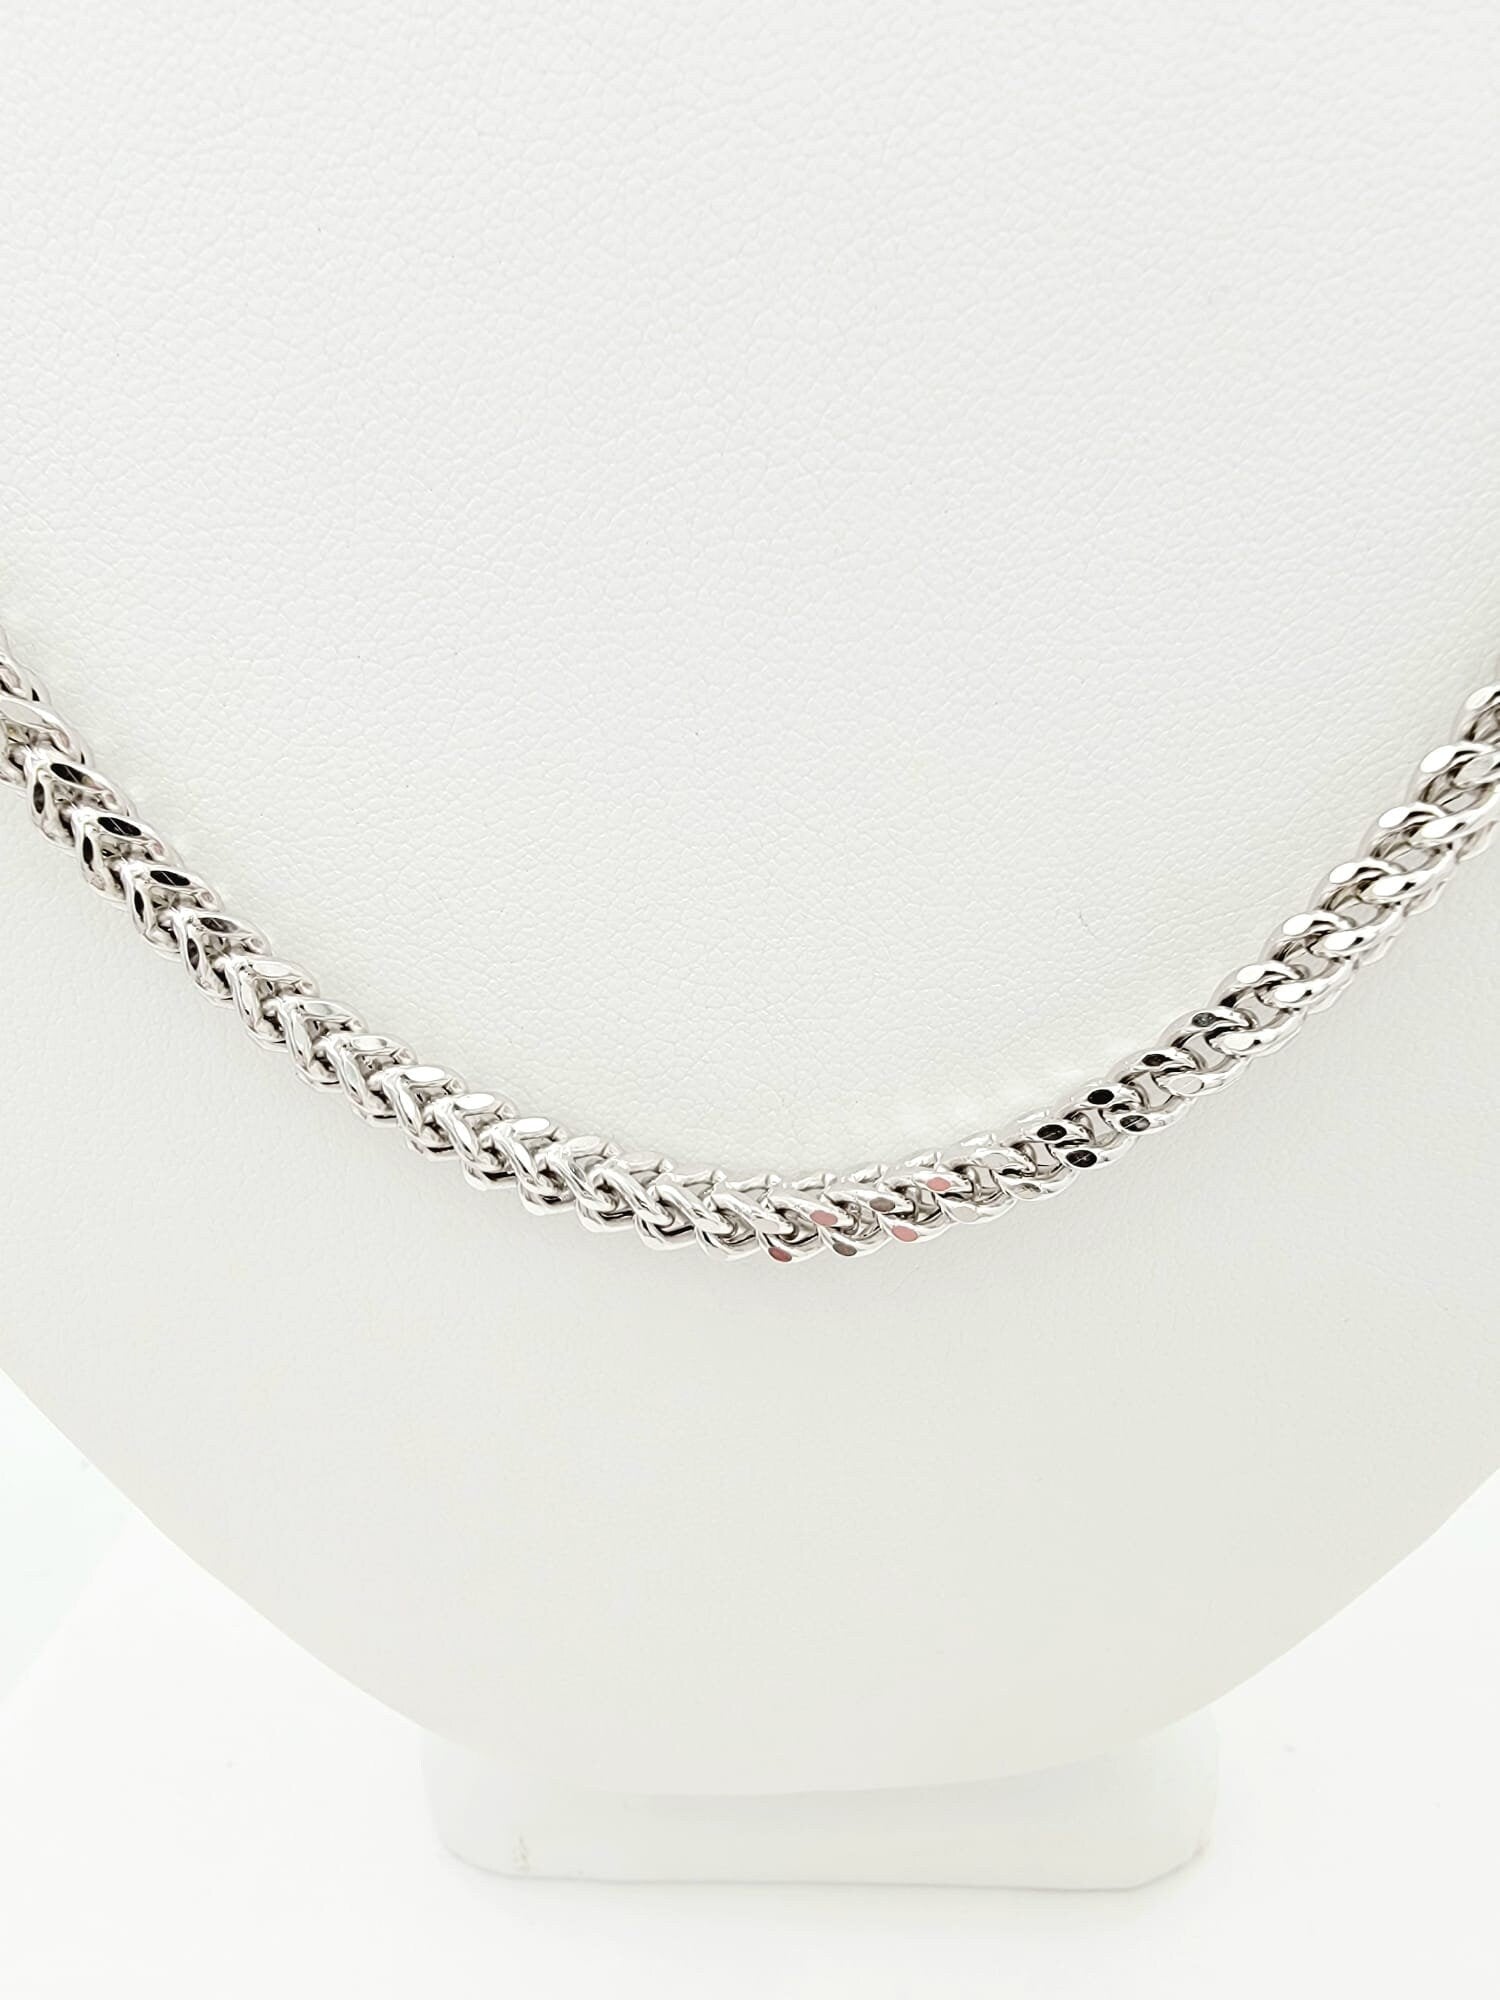 14k White Gold Solid Franco Chain